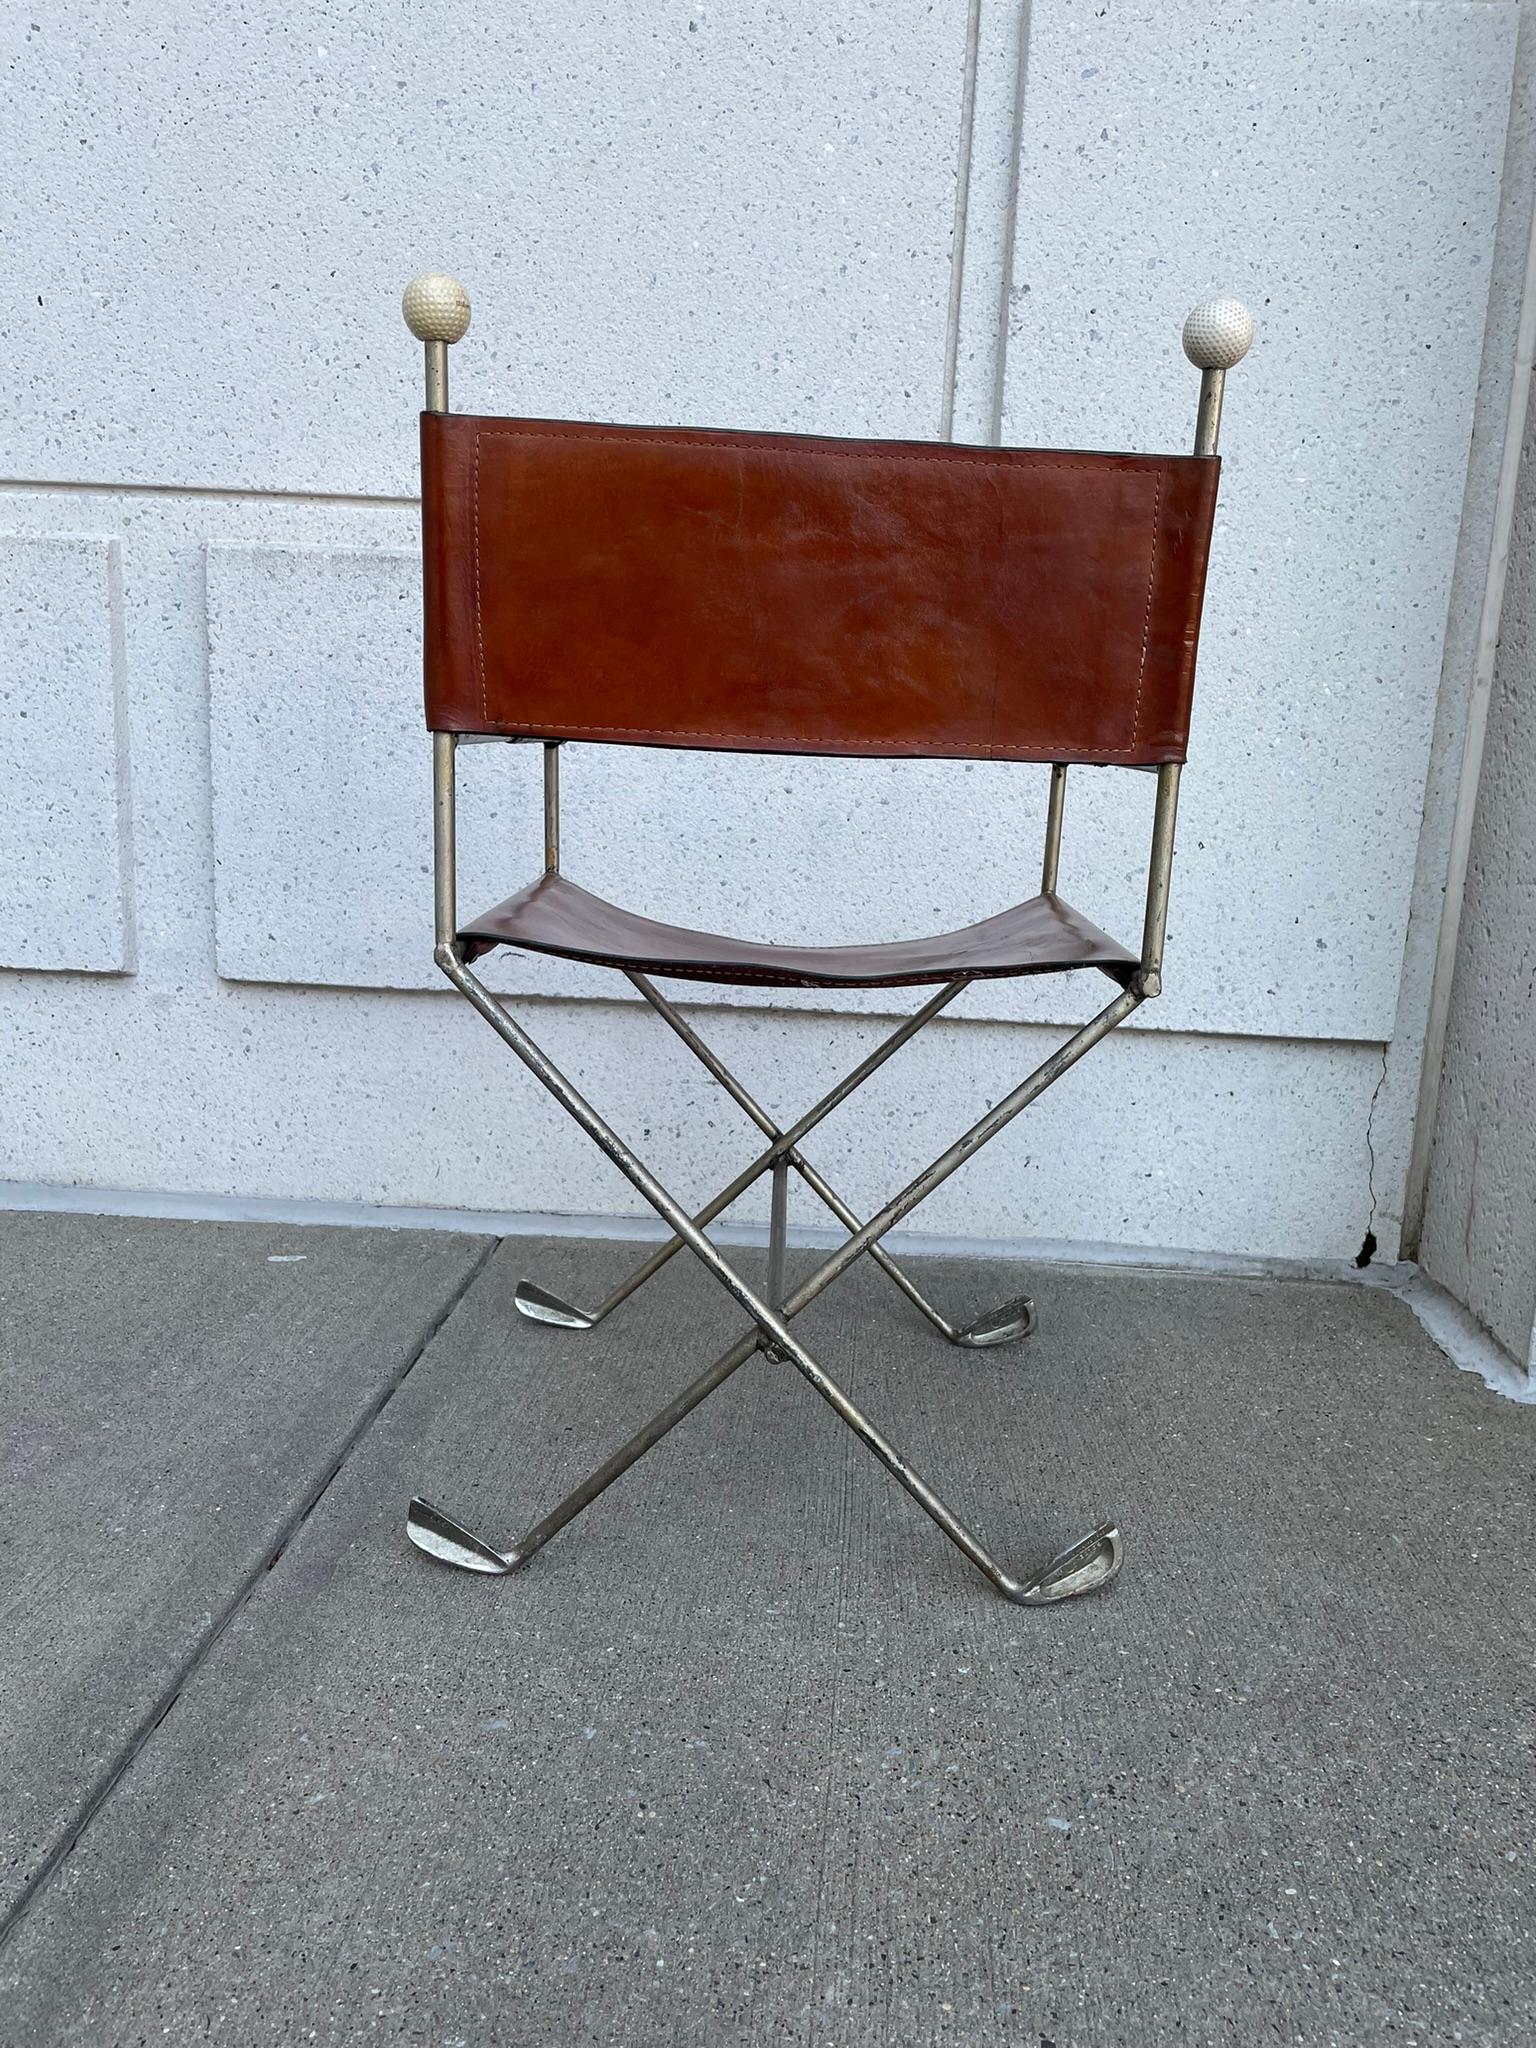 American Mid-20th Century Steel and Leather Directors Chair Made from Golf Clubs For Sale